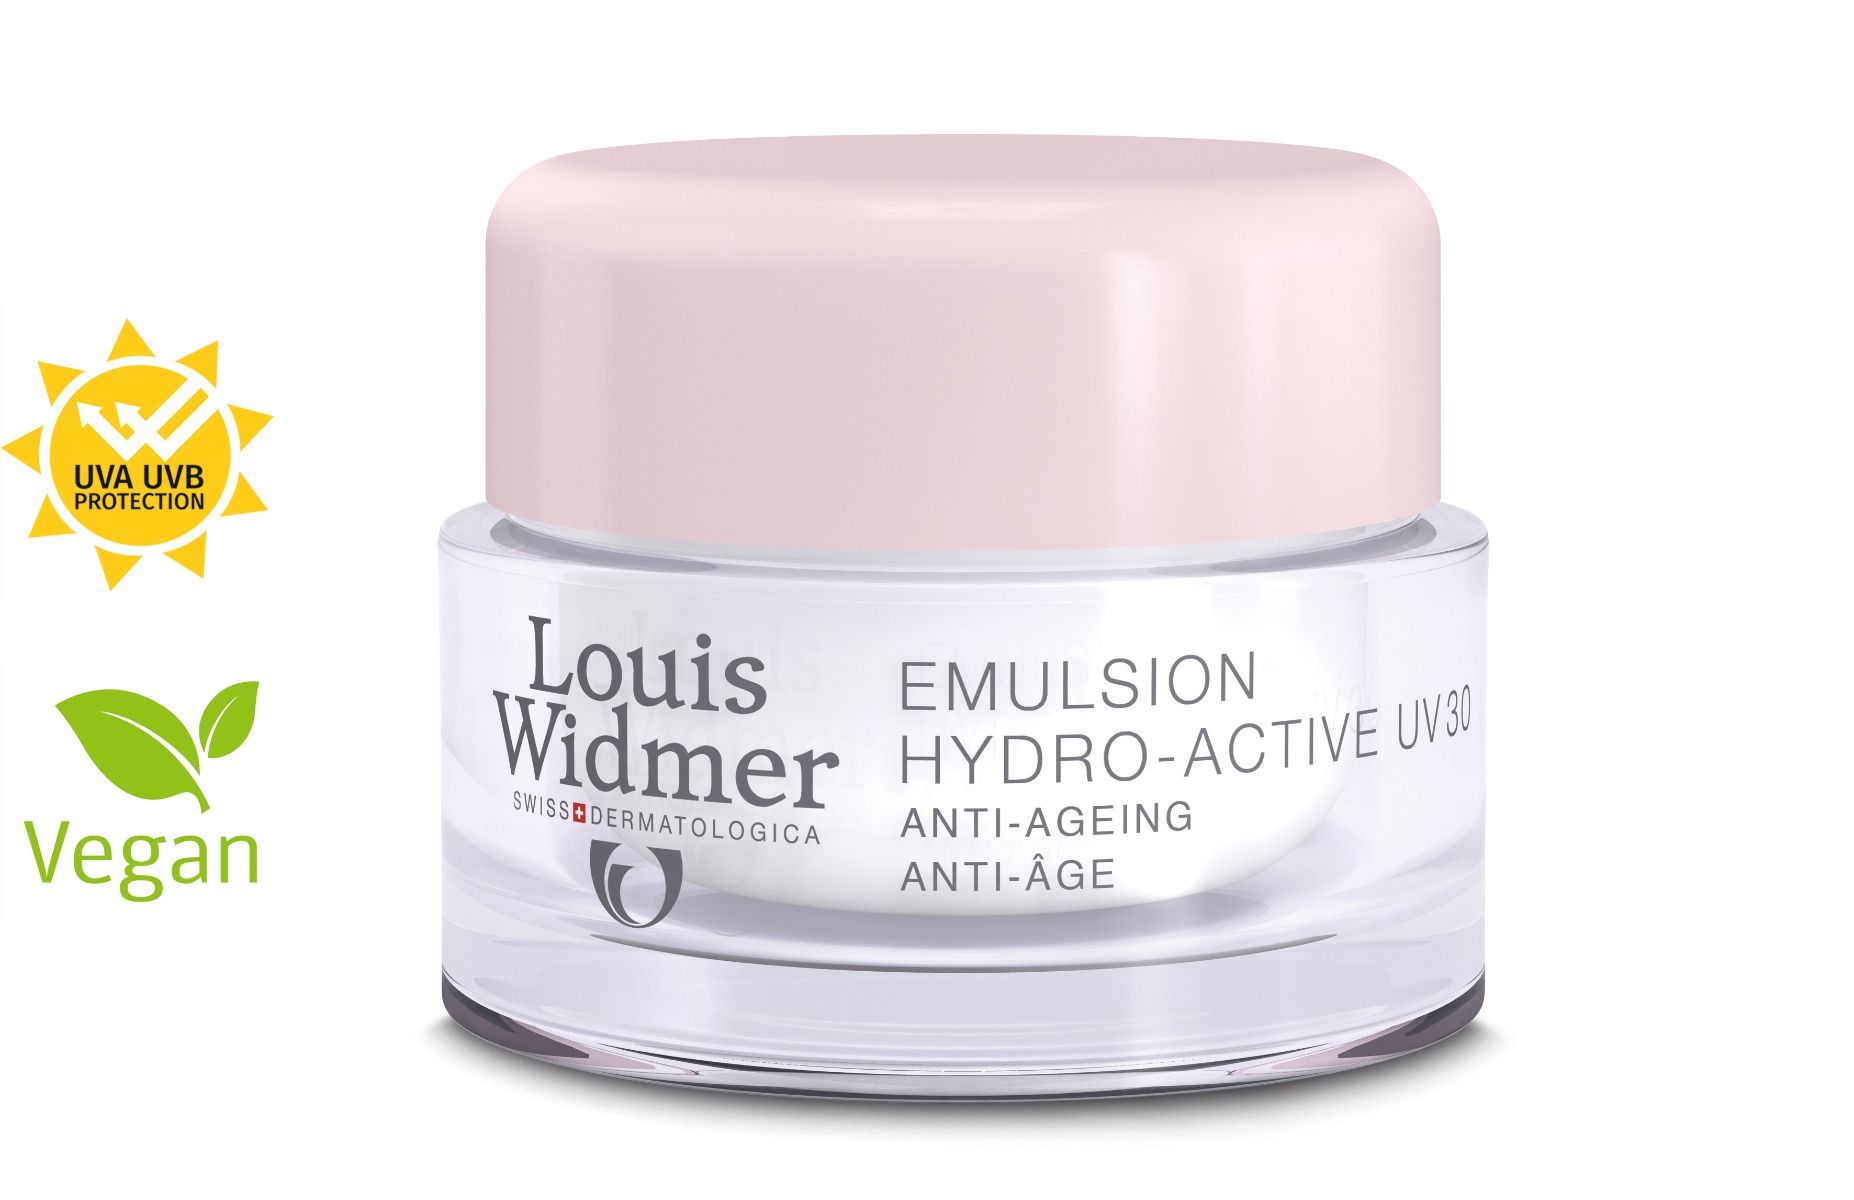 LOUISE WIDMER Tagesemulsion Hydro-Active UV 30